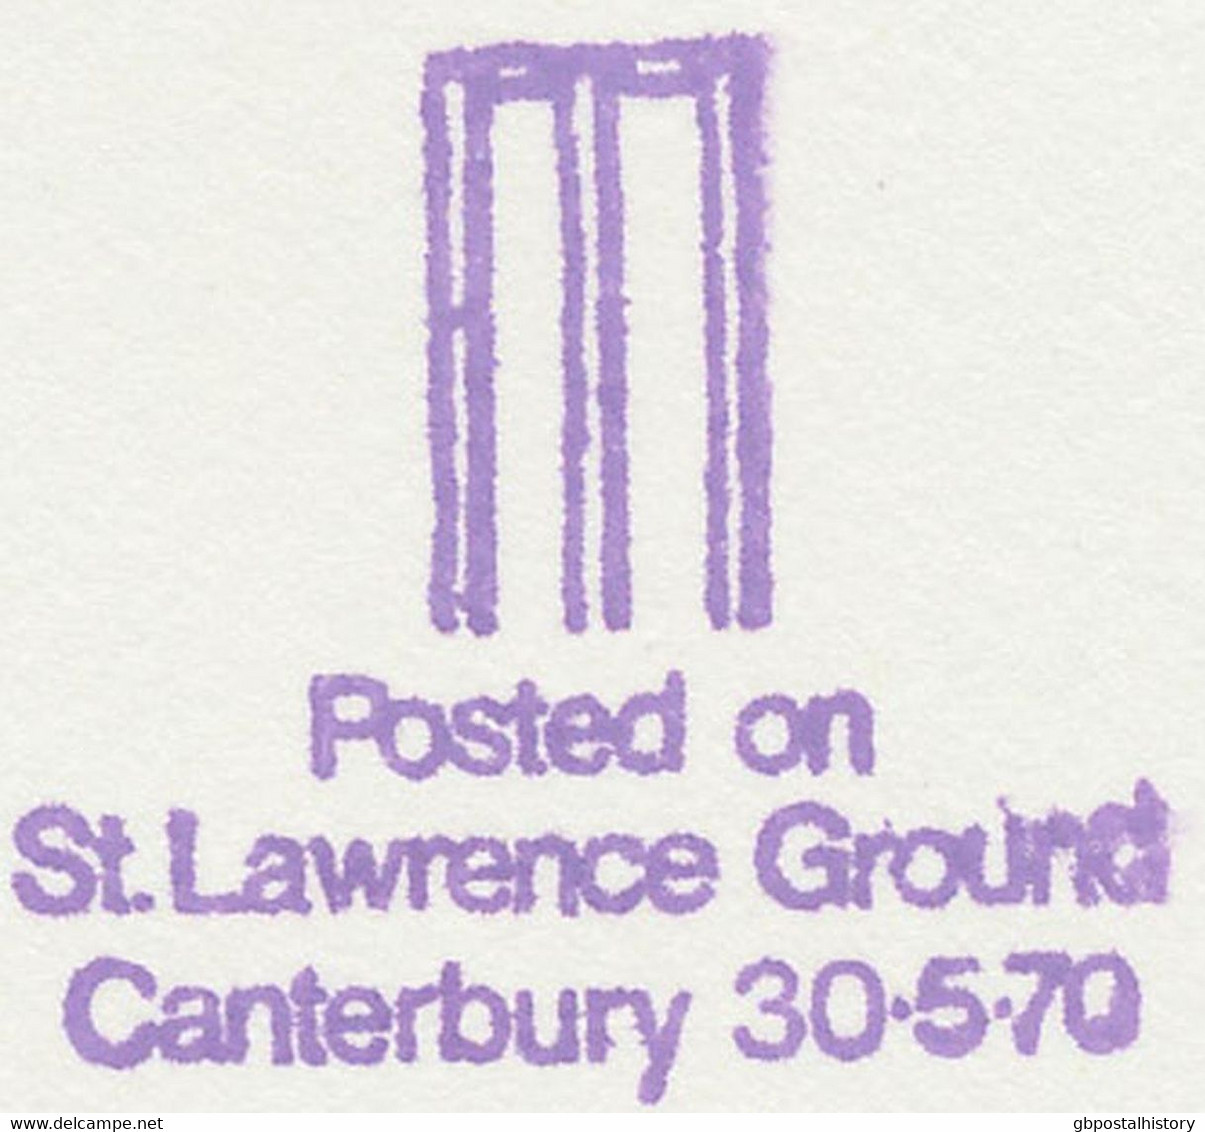 GB SPECIAL EVENT POSTMARKS KENT CRICKET CENTENARY 1870-1970 CANTERBURY, KENT, 30.5.1970 - Marcophilie